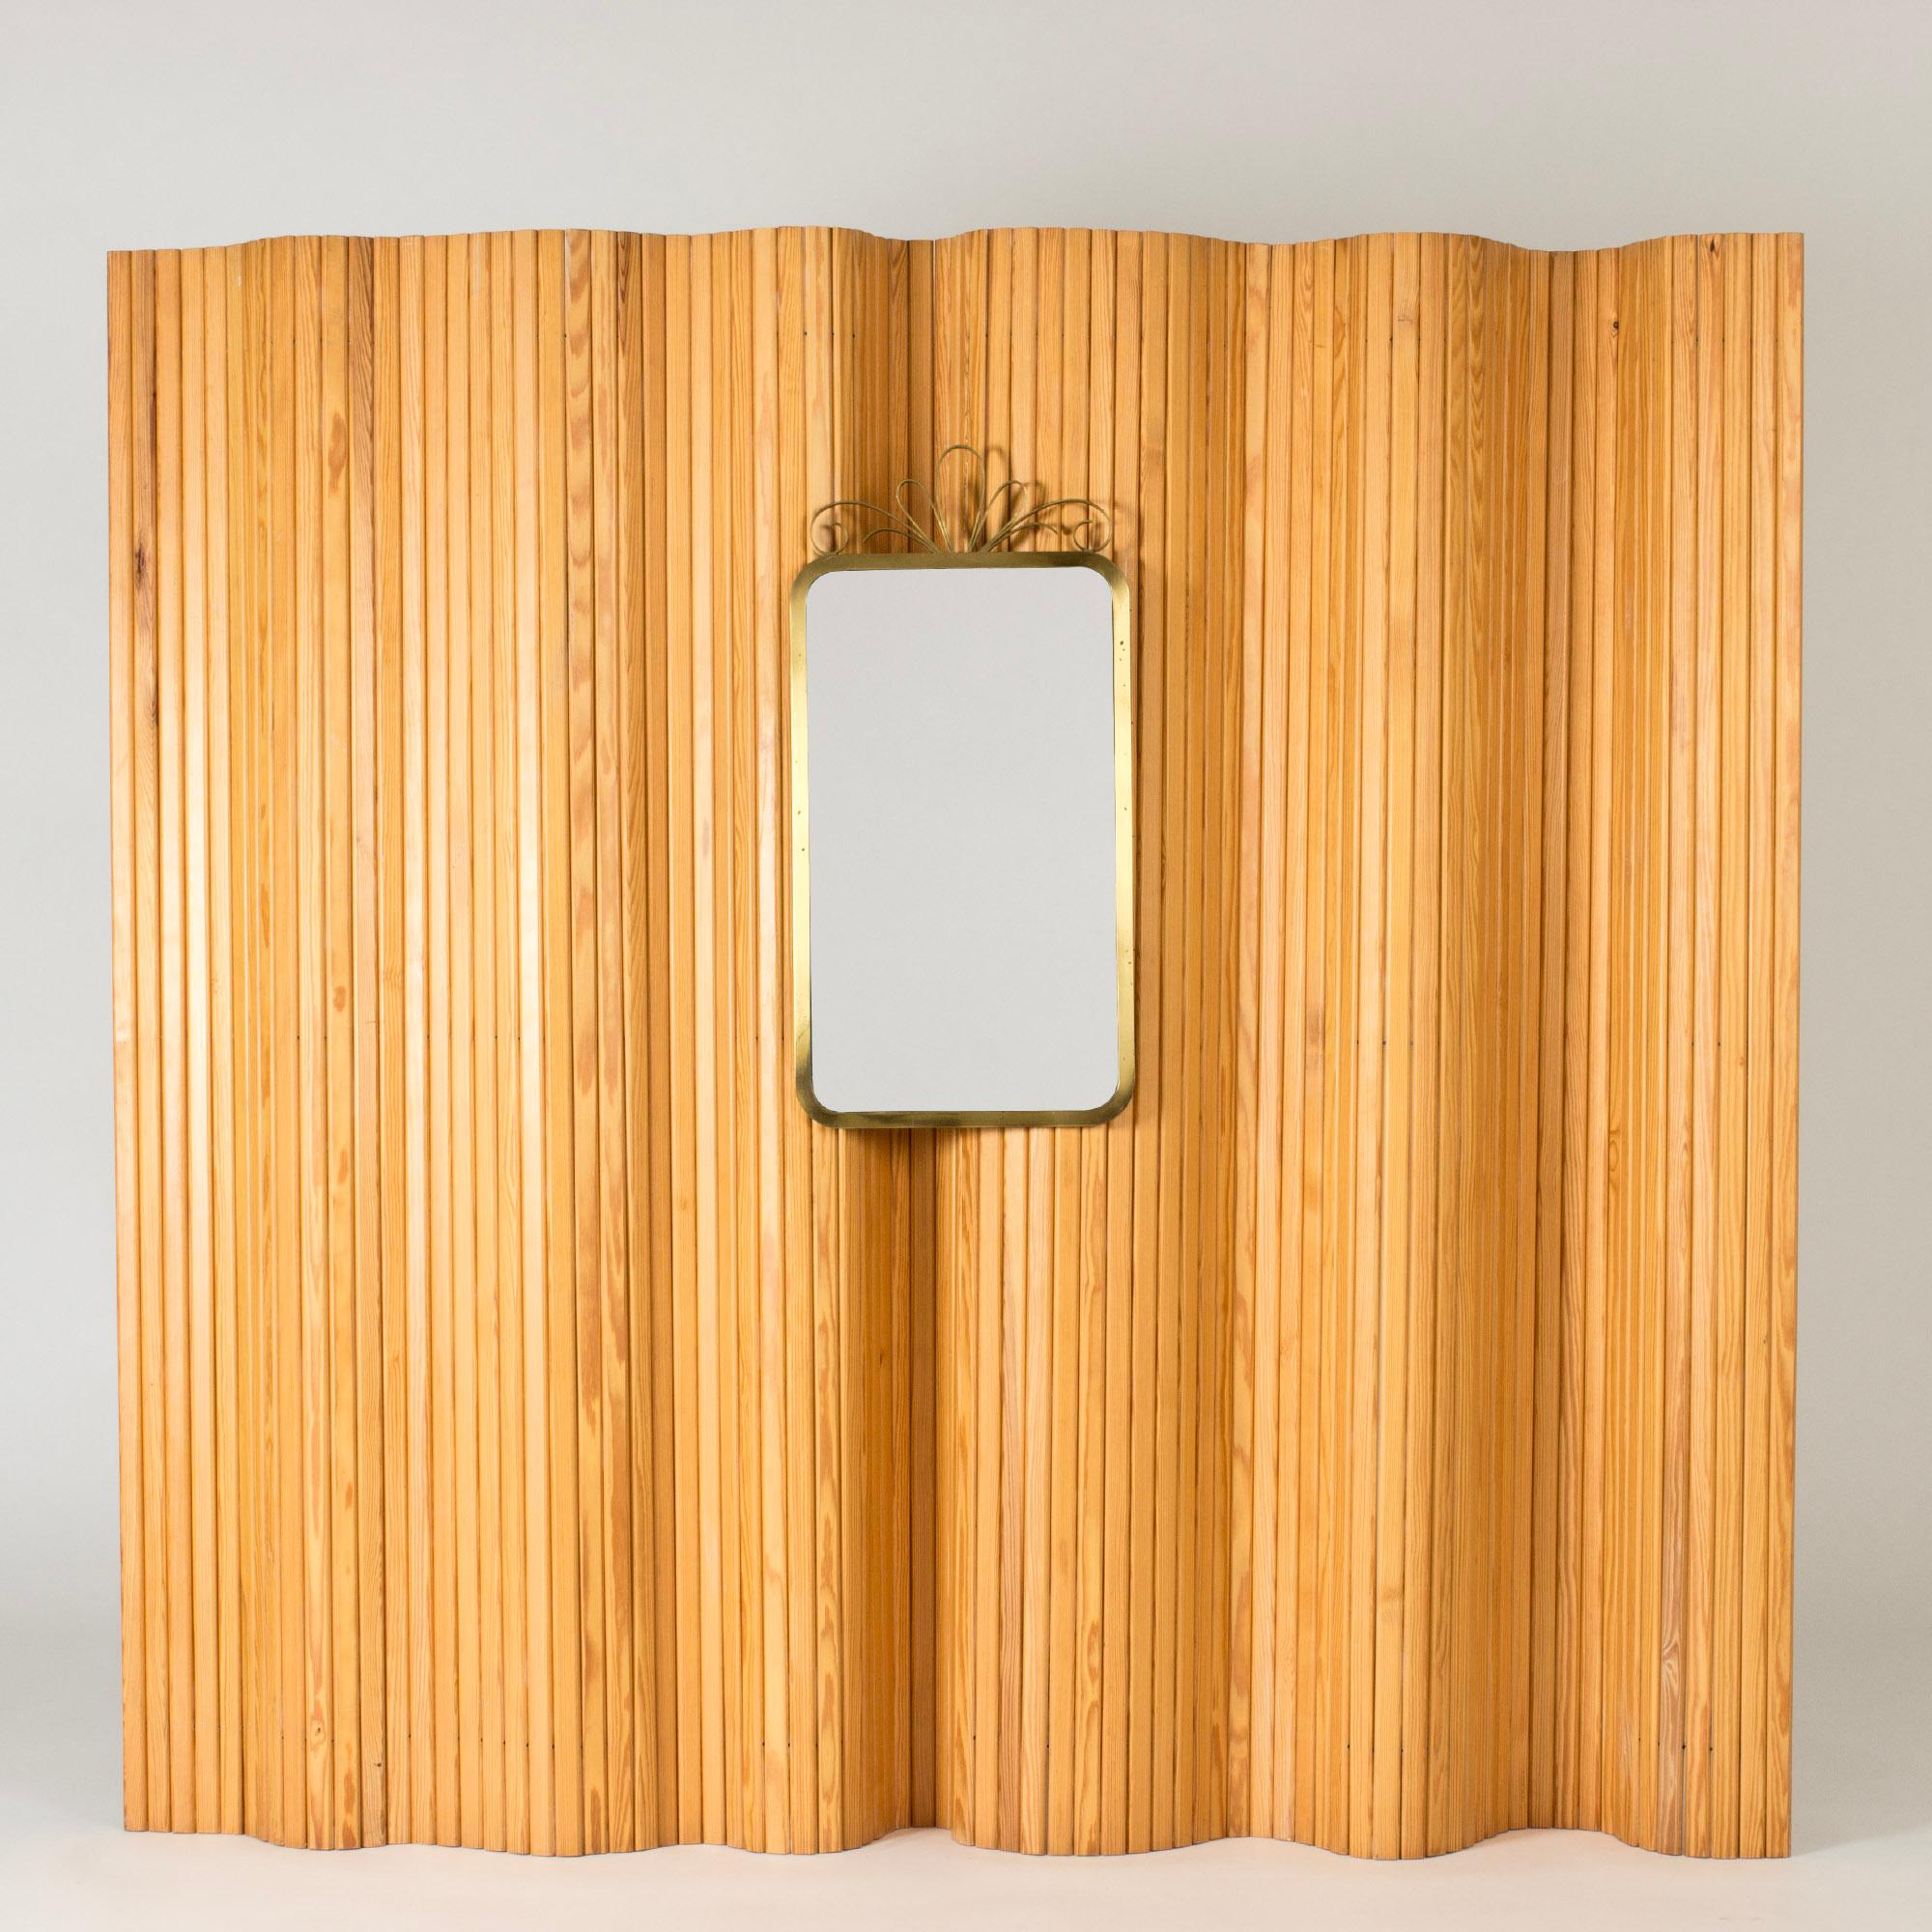 Elegant wall mirror from Ystad Metall, with a rounded corners brass frame. Decorative bow on top.